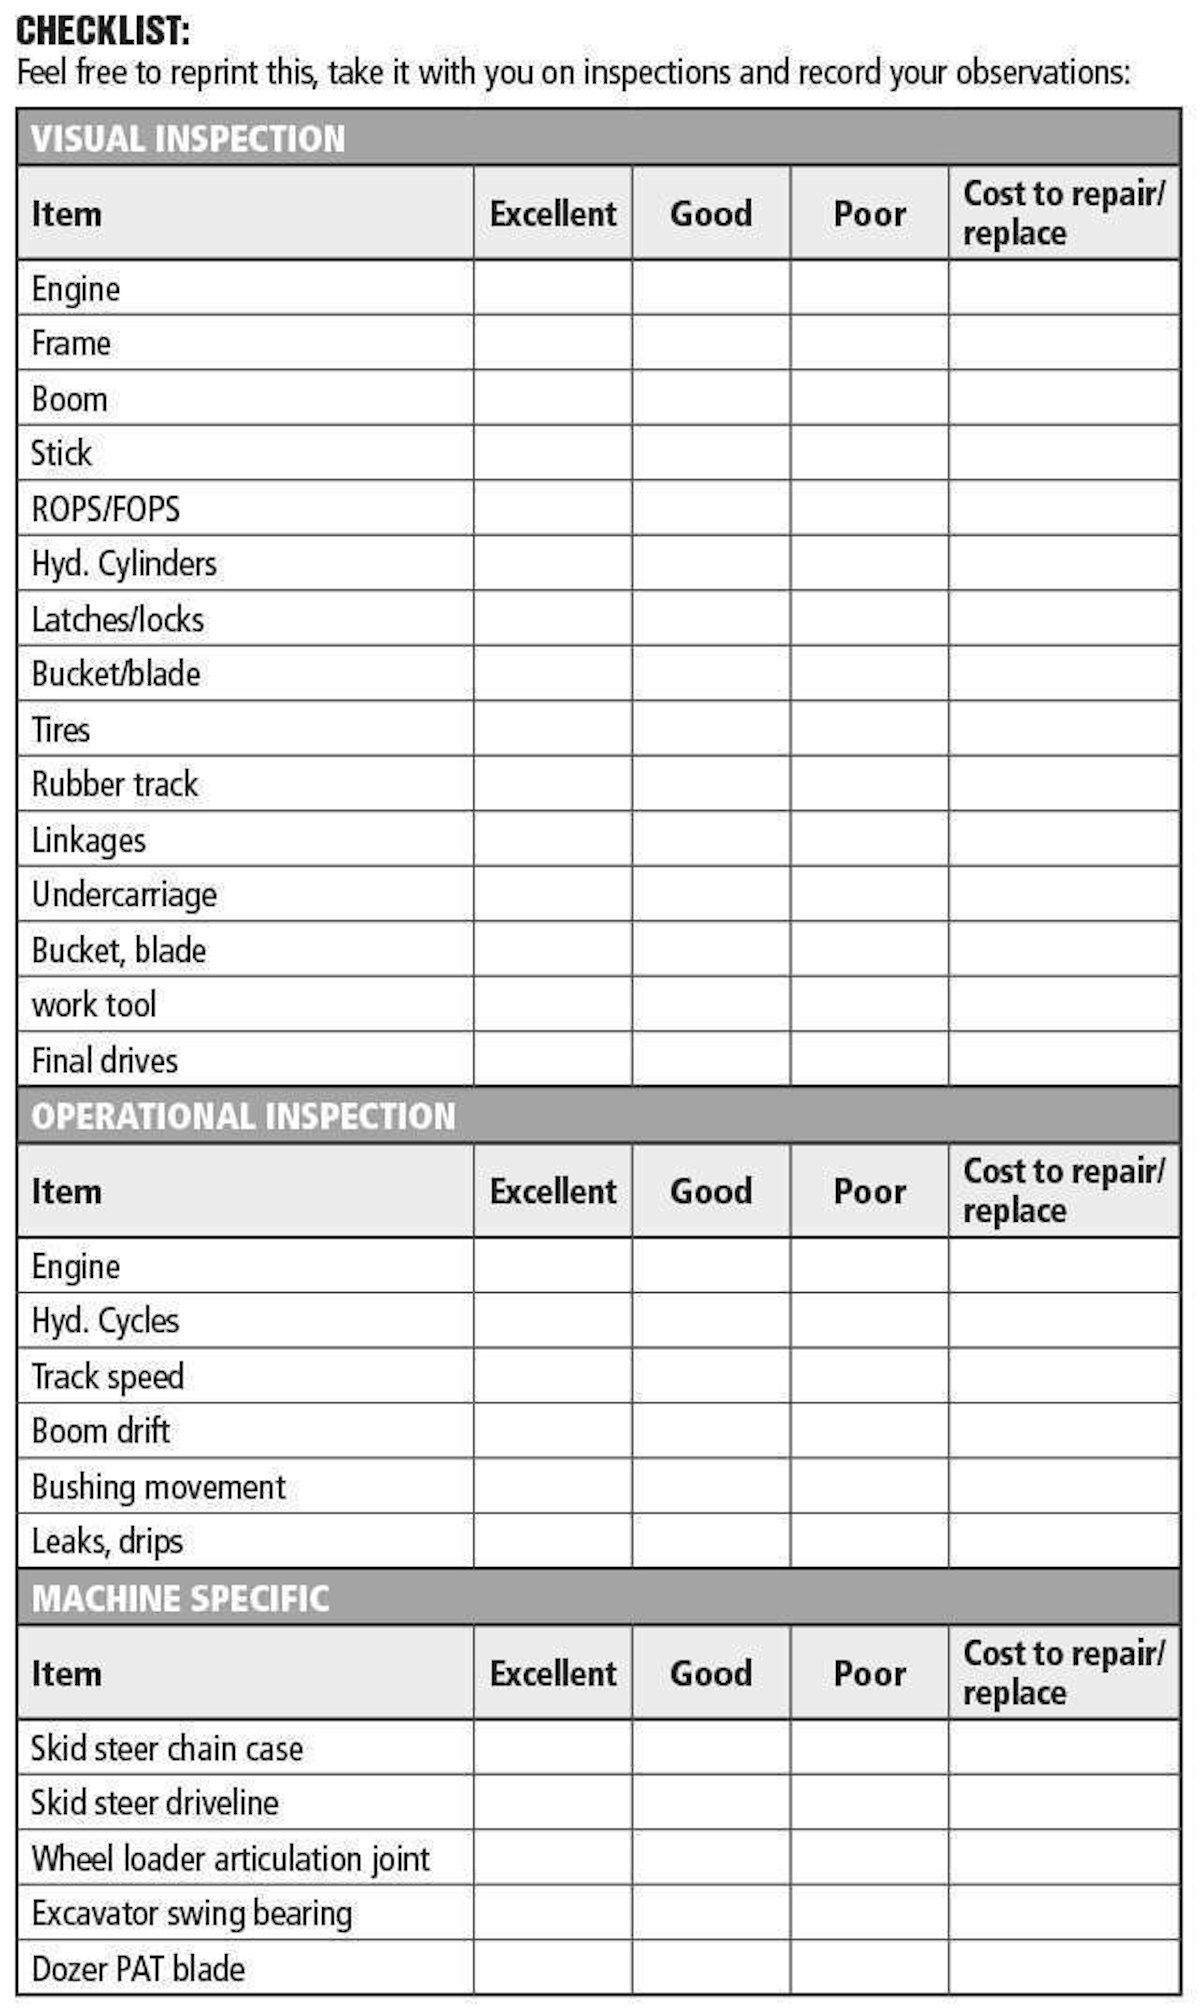 Home Inspection Tools List and Equipment